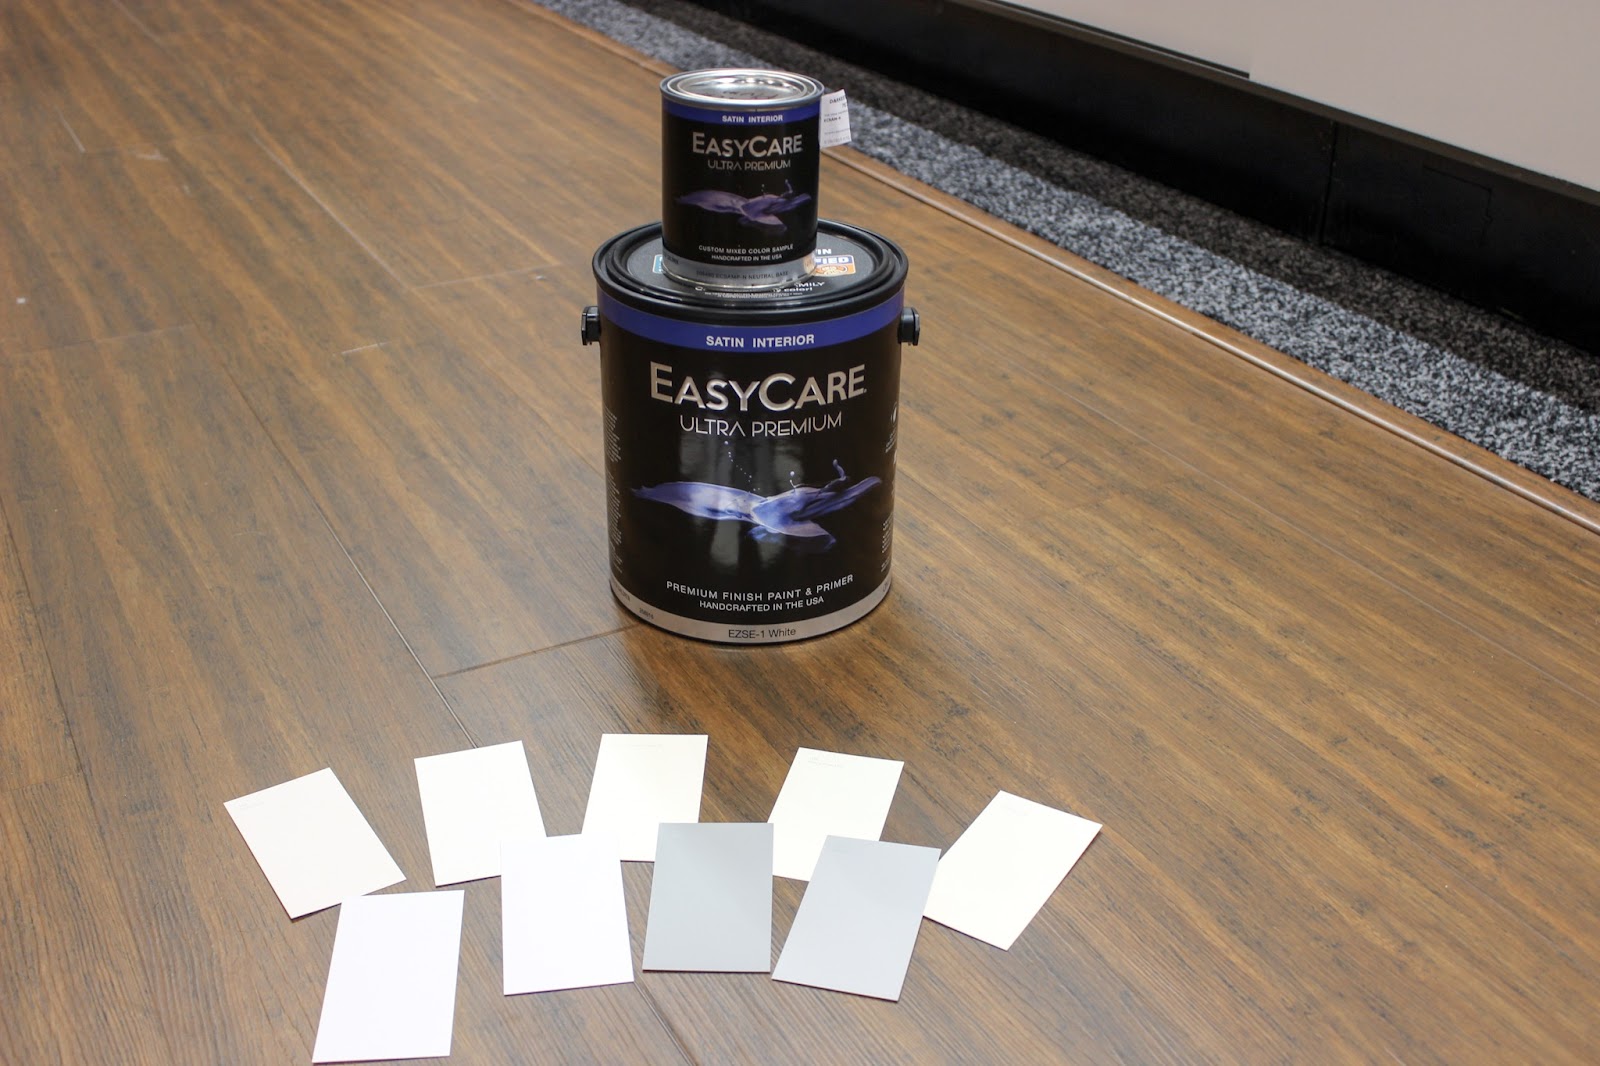 EasyCare Ultra Premium Paint on ground with samples